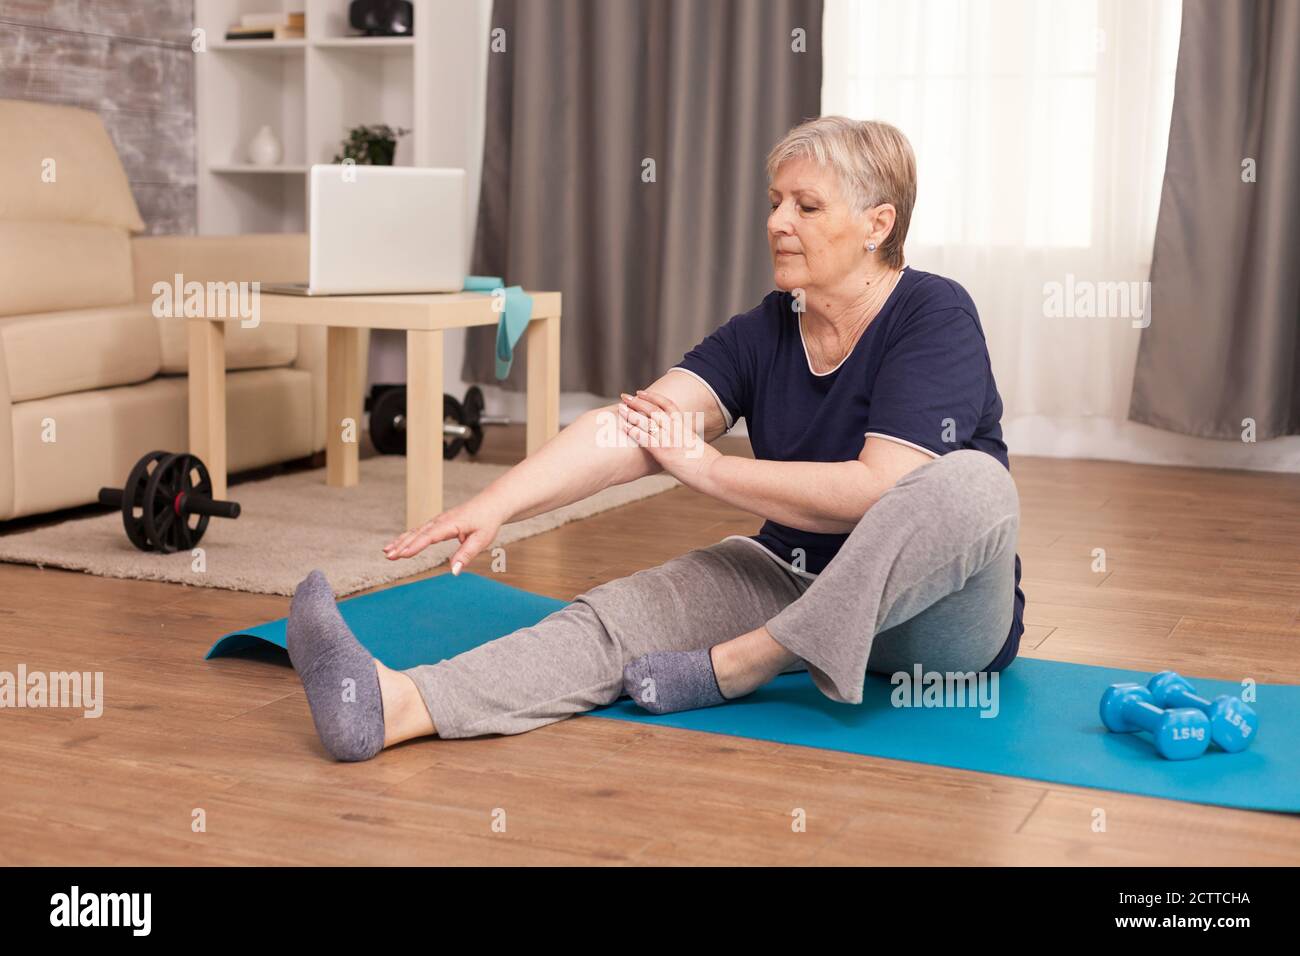 Senior healthy woman practicing fitness at home. Old person pensioner online internet exercise training at home sport activity with dumbbell, resistance band, swiss ball at elderly retirement age Stock Photo